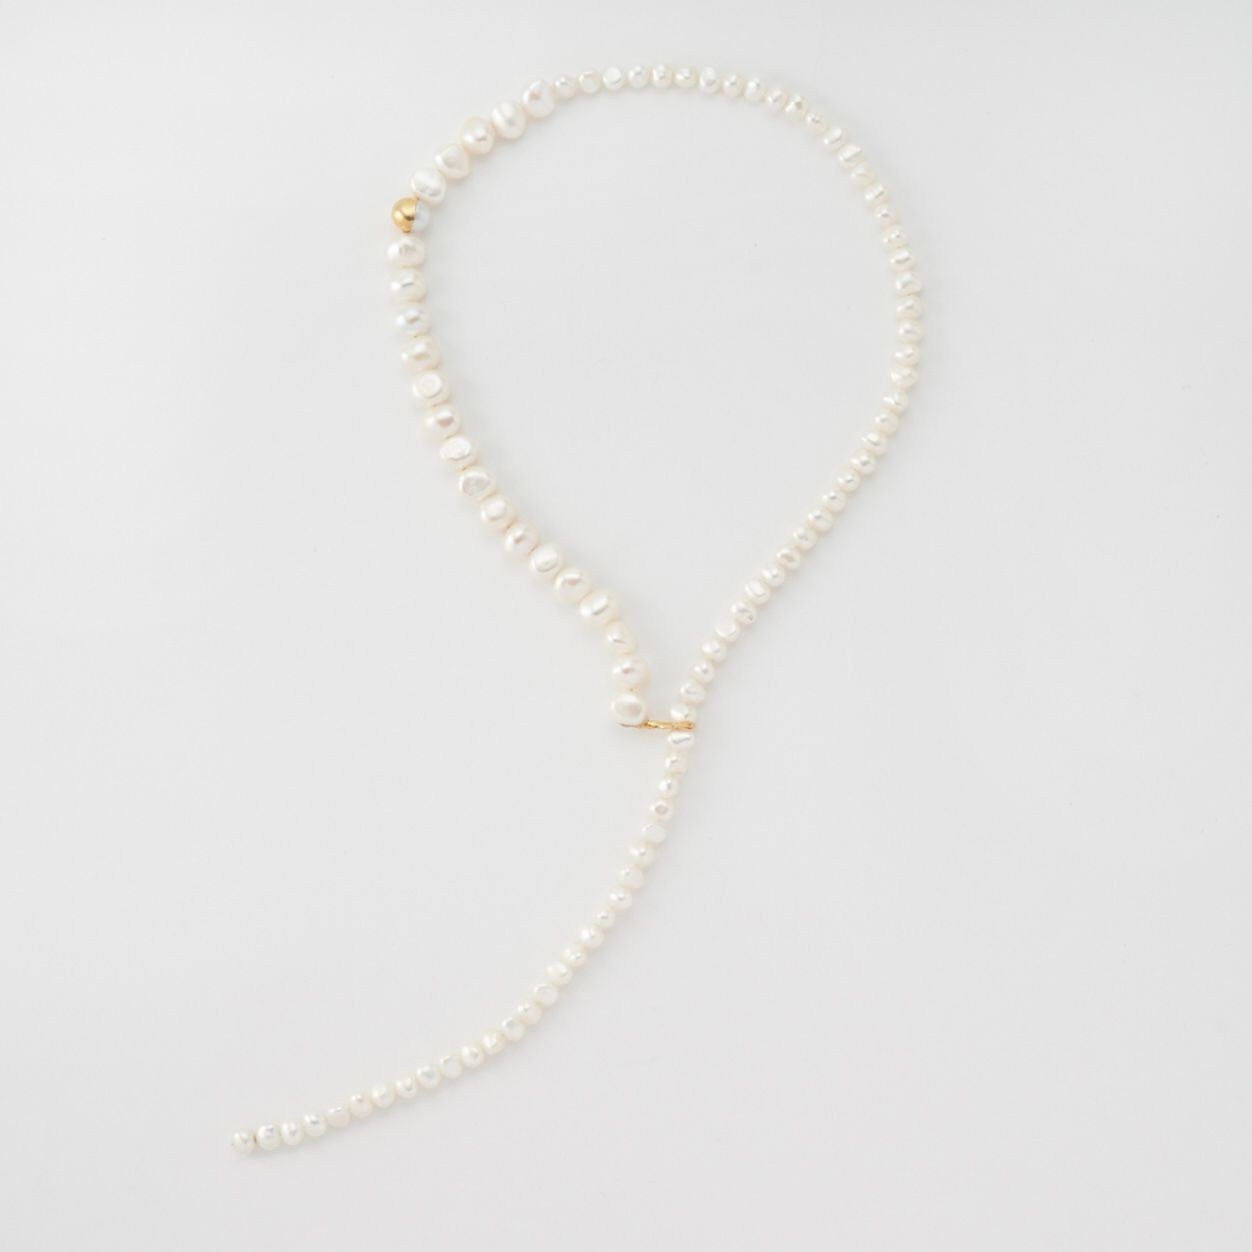 PREEK - 【お取り寄せ注文可能】Baroque Pearl Lariat Necklace